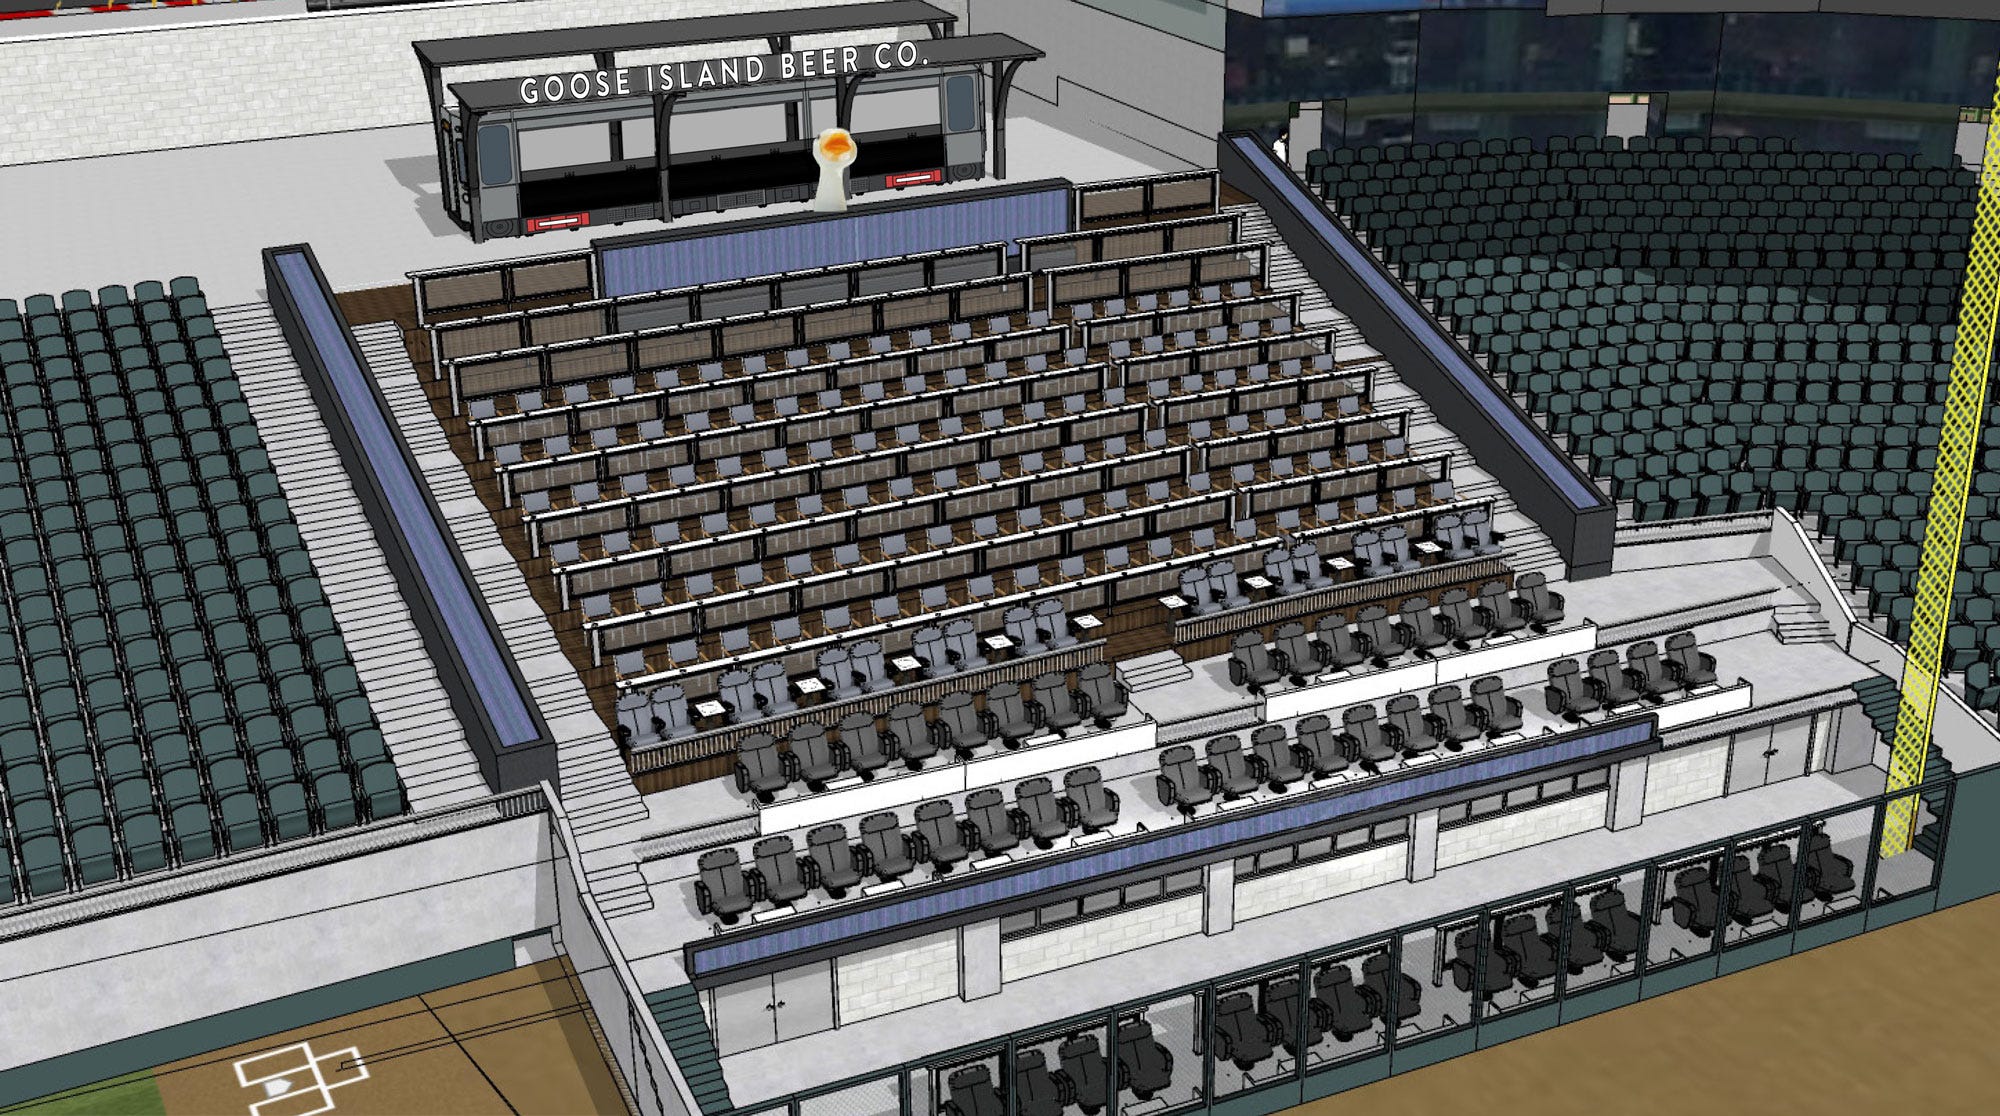 White Sox Cellular Field Seating Chart